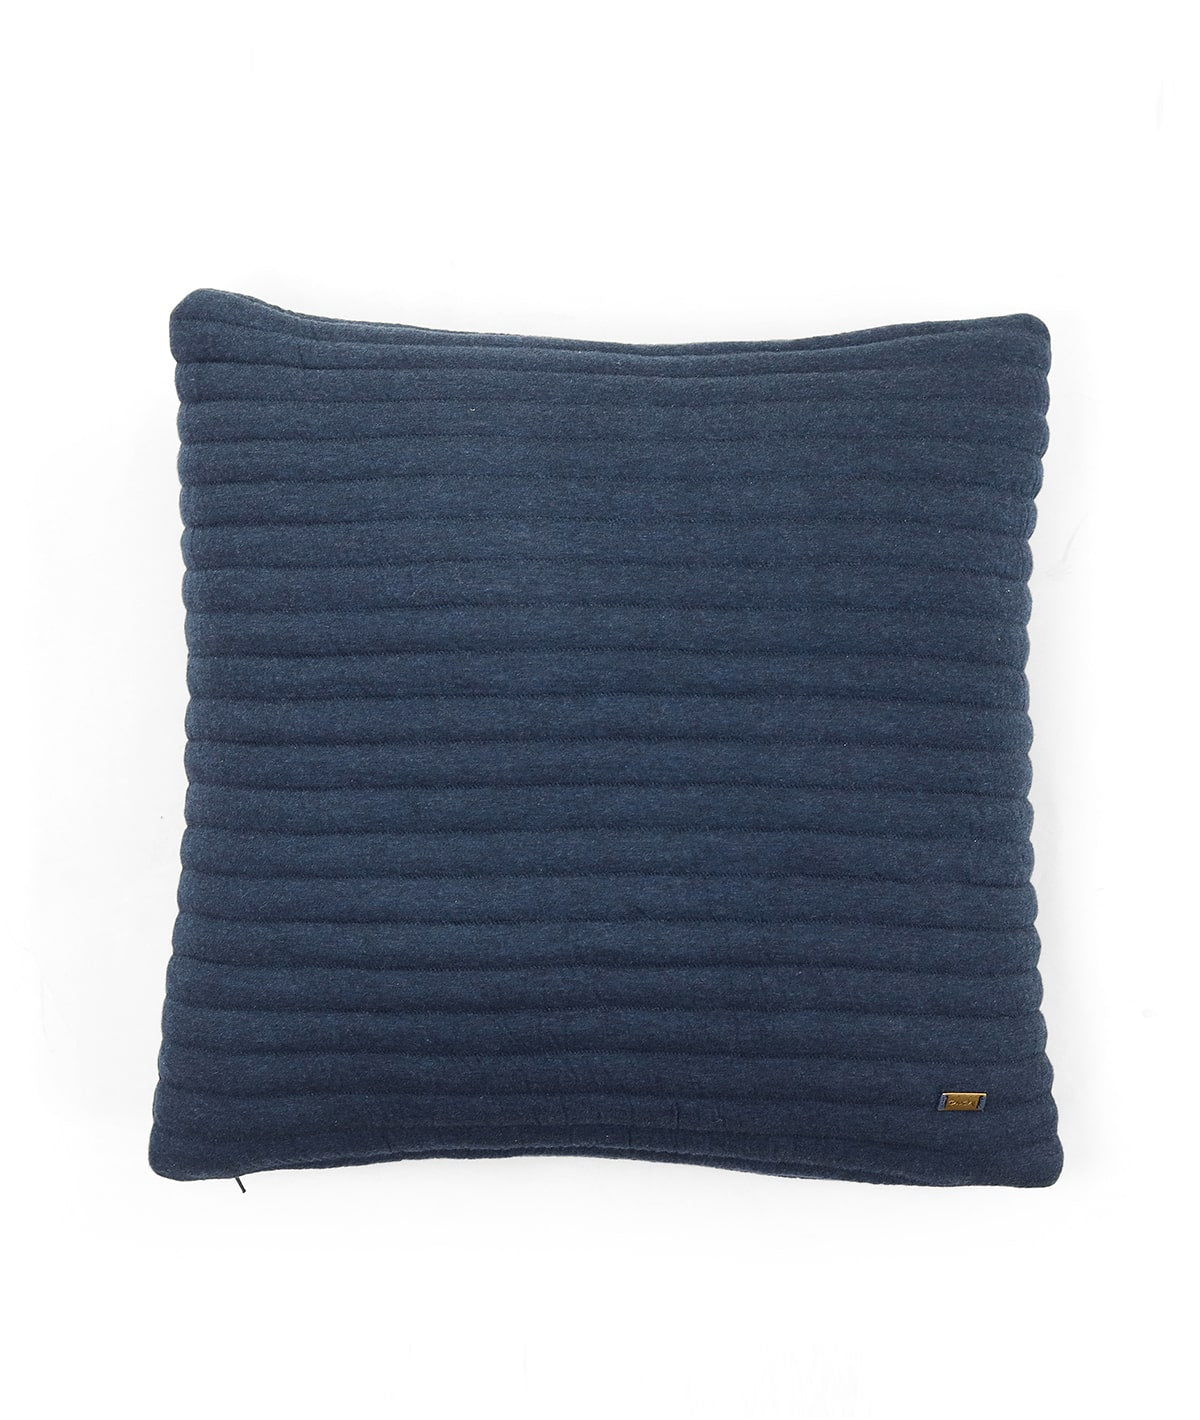 Waseme Navy Melange Cotton Knitted Quilted Decorative 18 X 18 Inches Cushion Cover